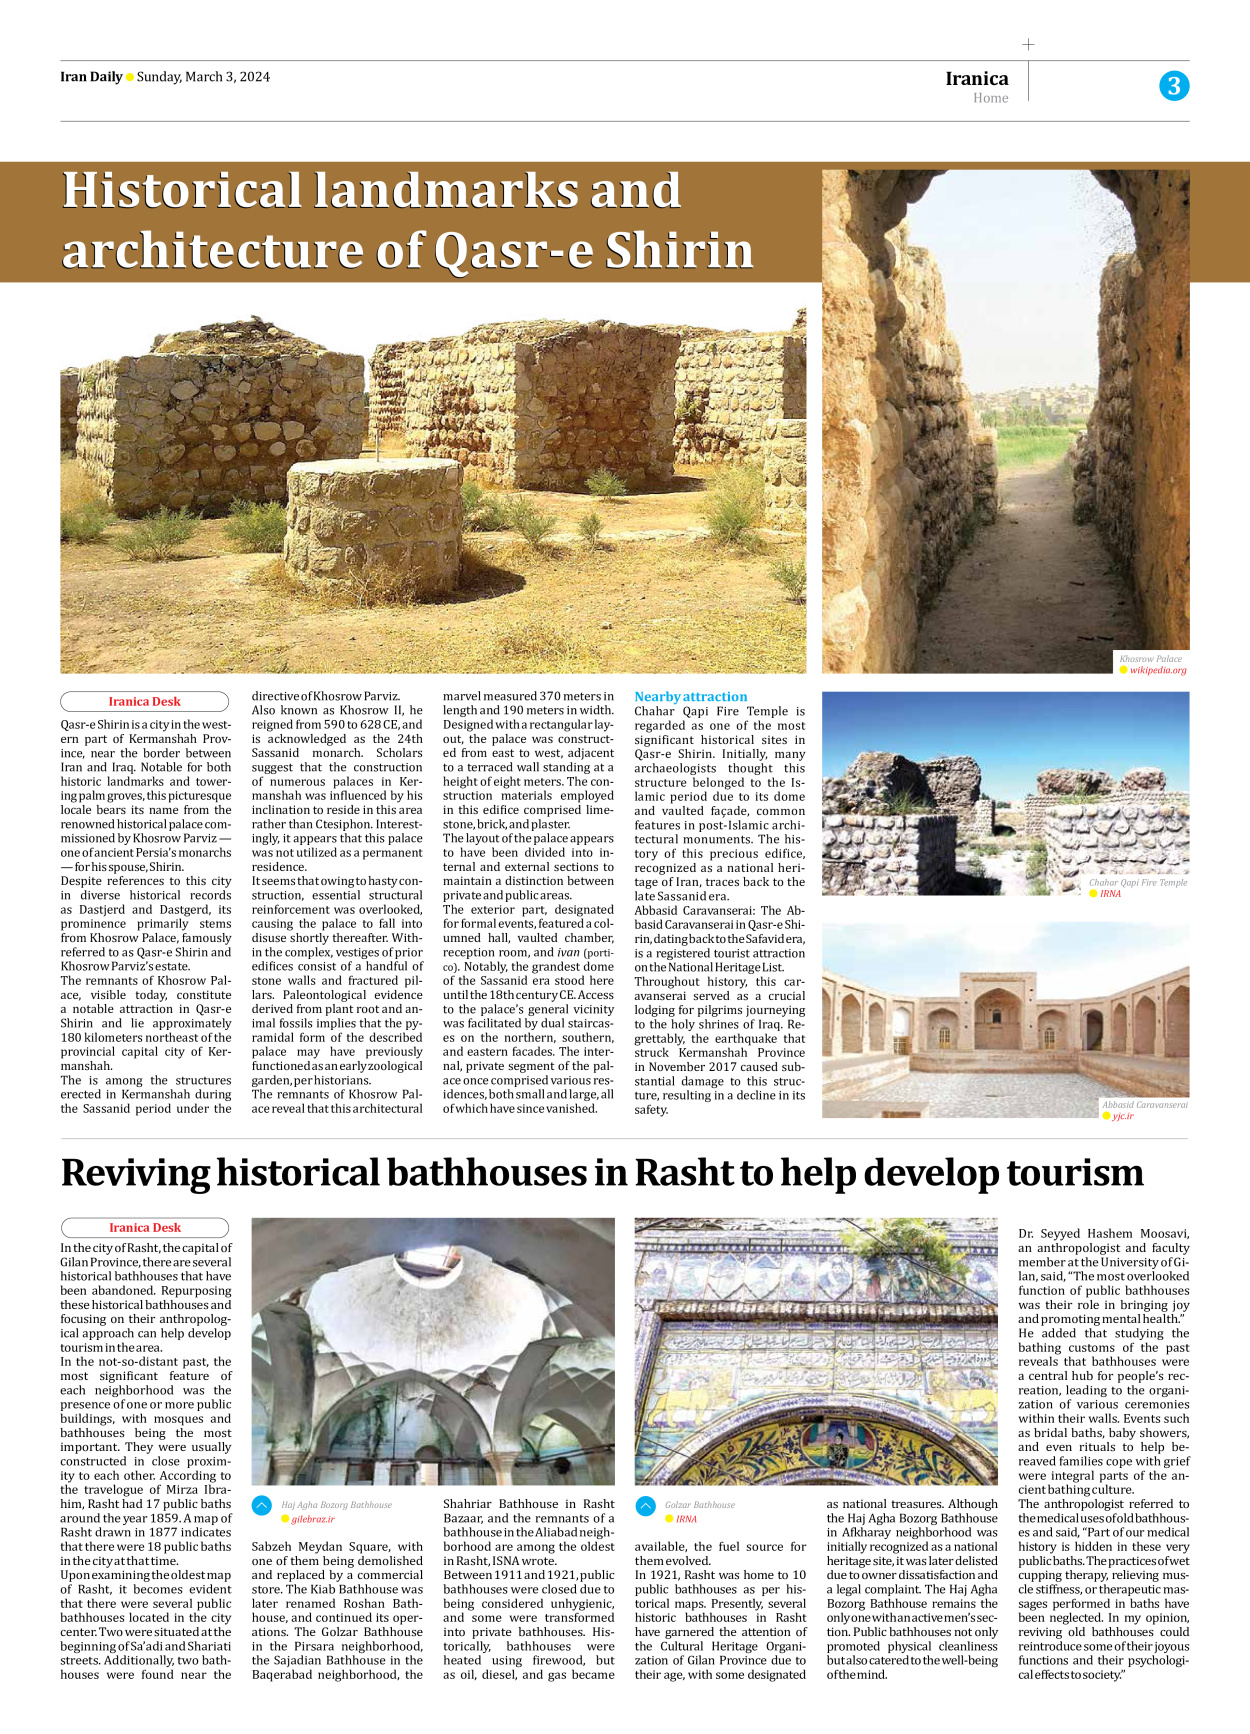 Iran Daily - Number Seven Thousand Five Hundred and Twenty - 03 March 2024 - Page 3